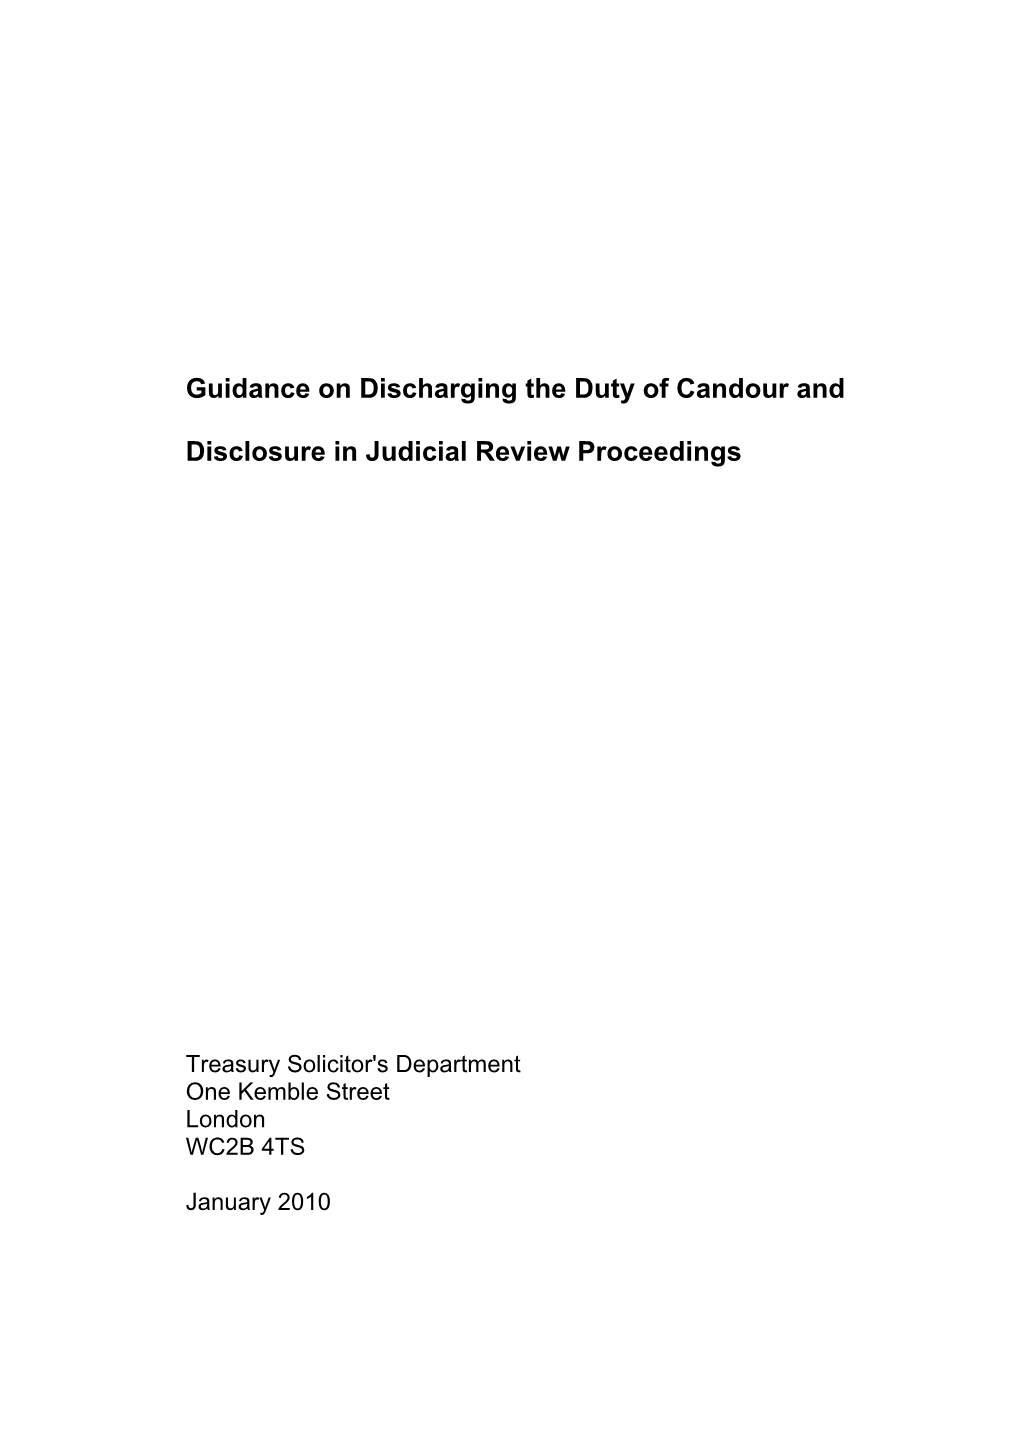 Guidance on Discharging the Duty of Candour and Disclosure in Judicial Review Proceedings